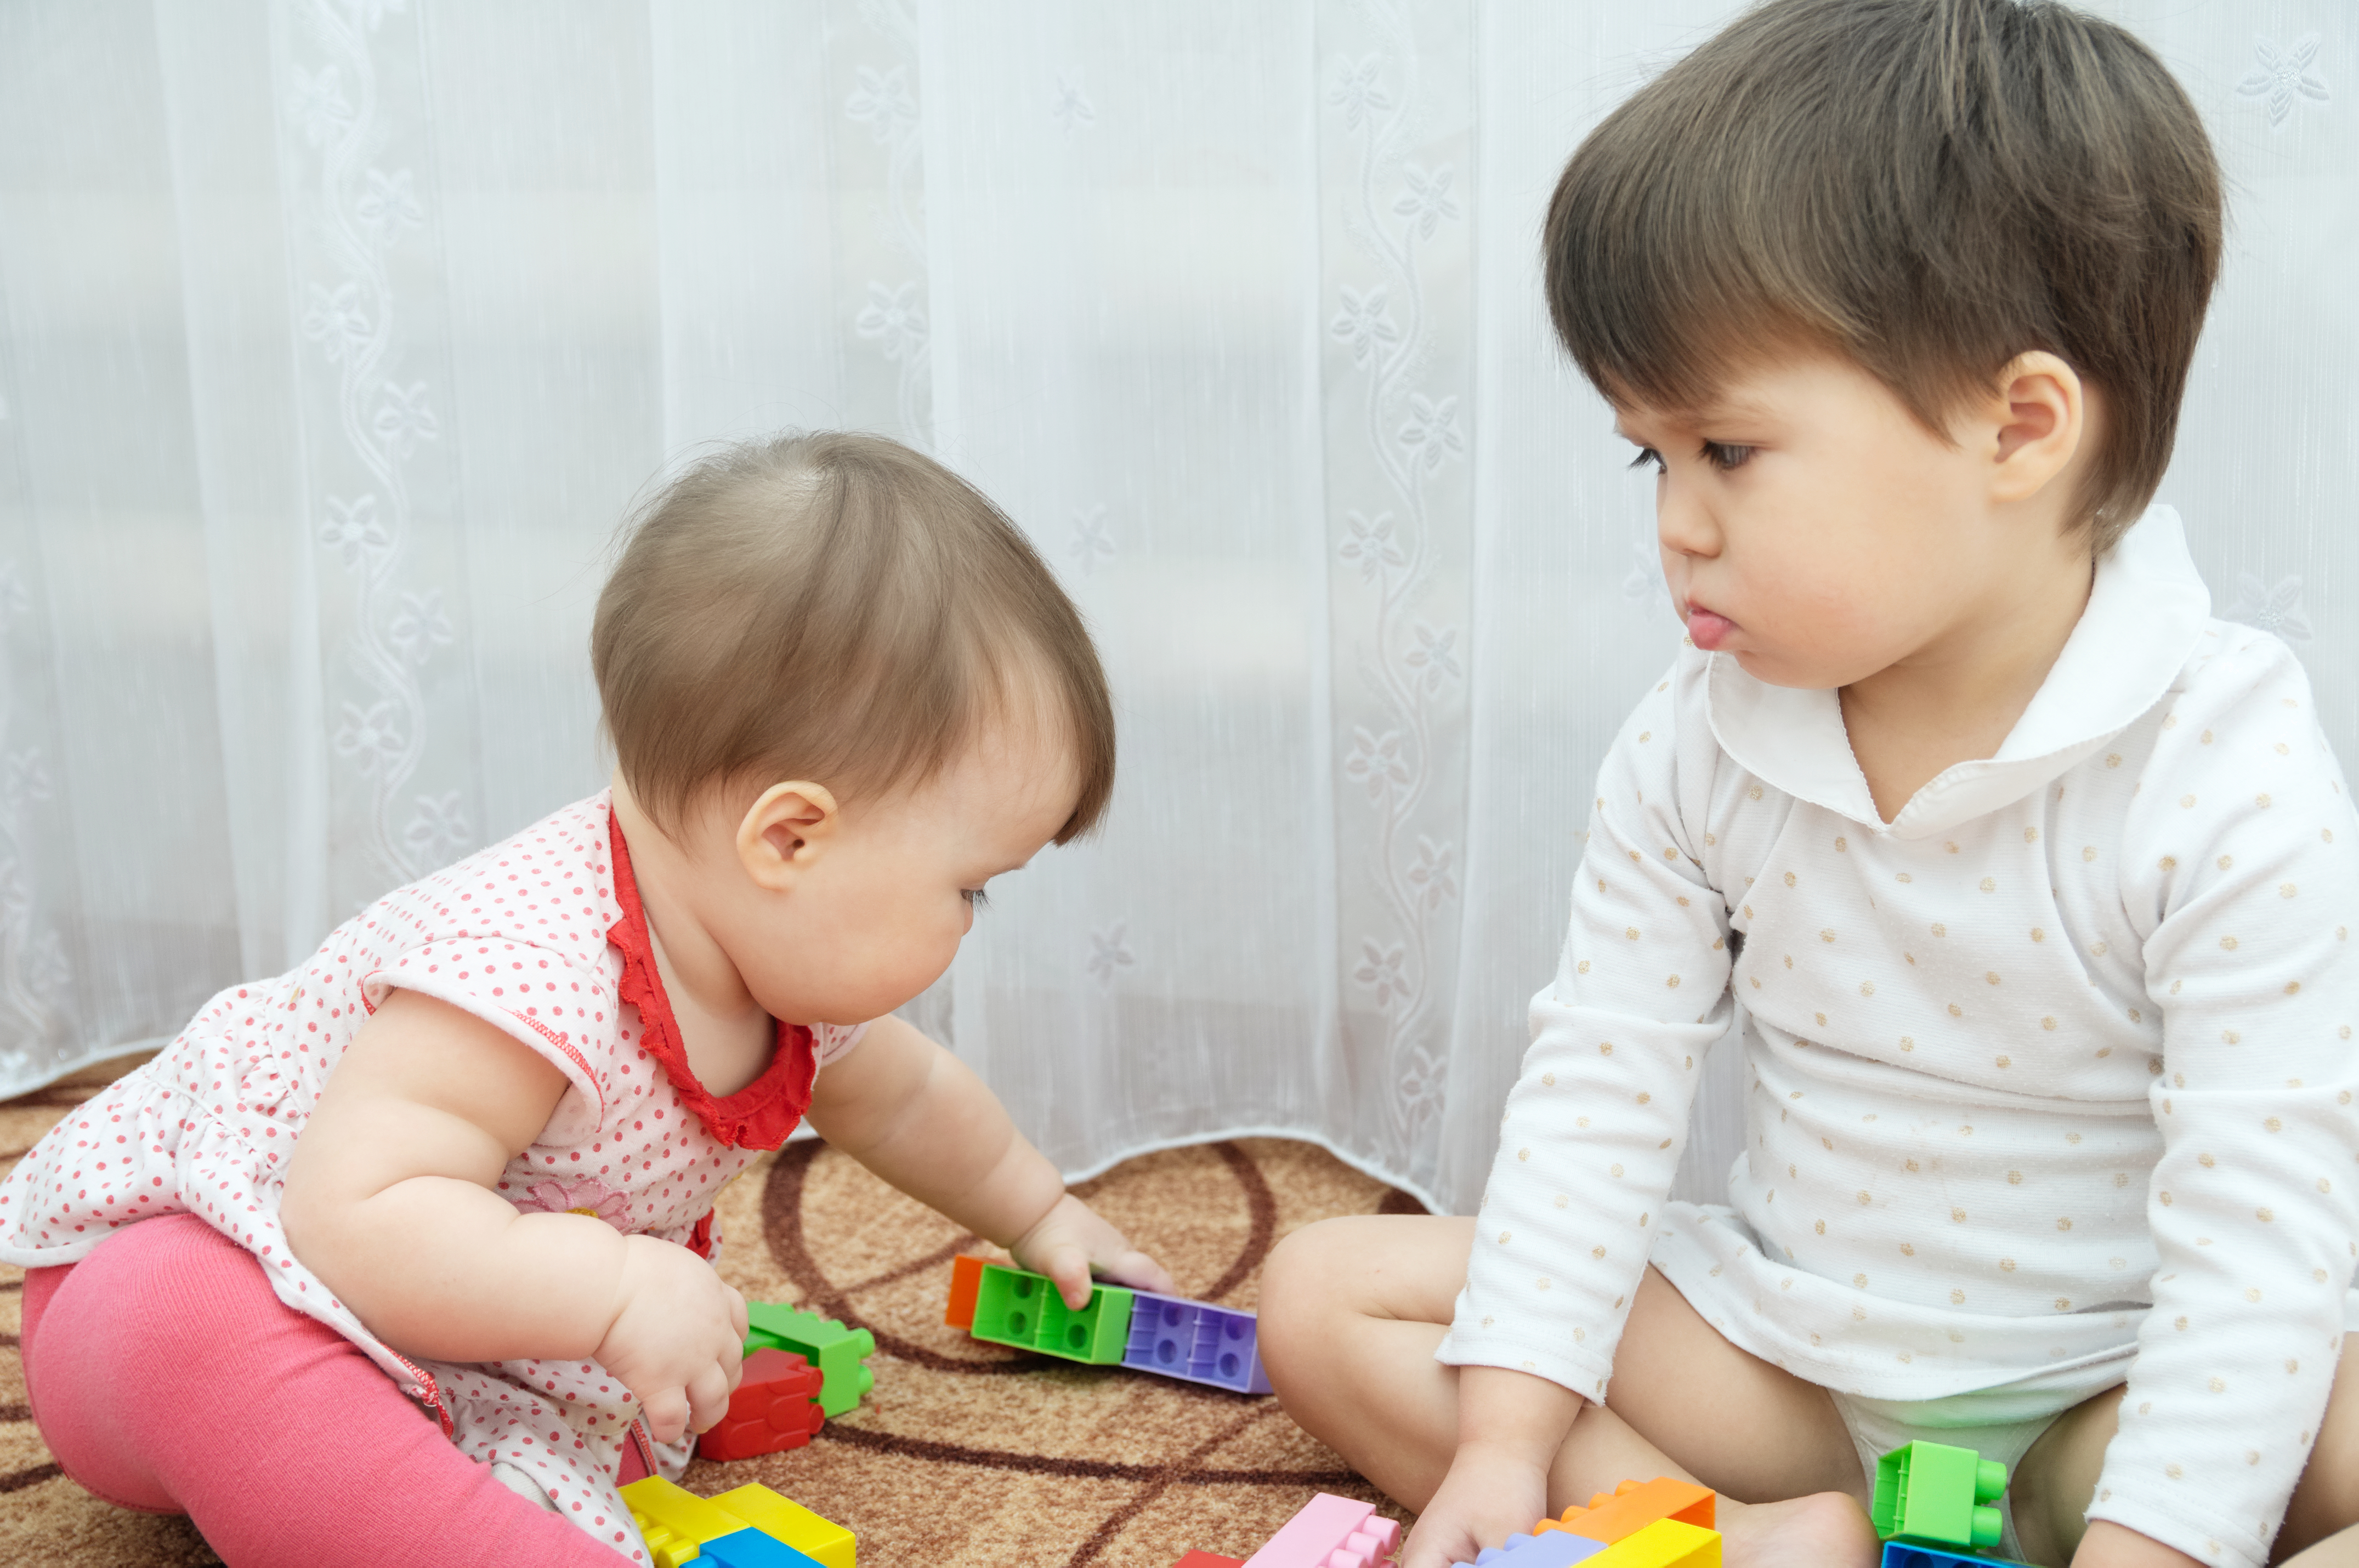 how do I introduce my new baby to a sibling? What to do when your child is jealous of a newborn. Find out the signs toddler is jealous of new baby and help deal with new baby and toddler tantrums! Here is how to handle and dissolve sibling jealousy. #parentingtips #guide #siblings #siblingjealousy